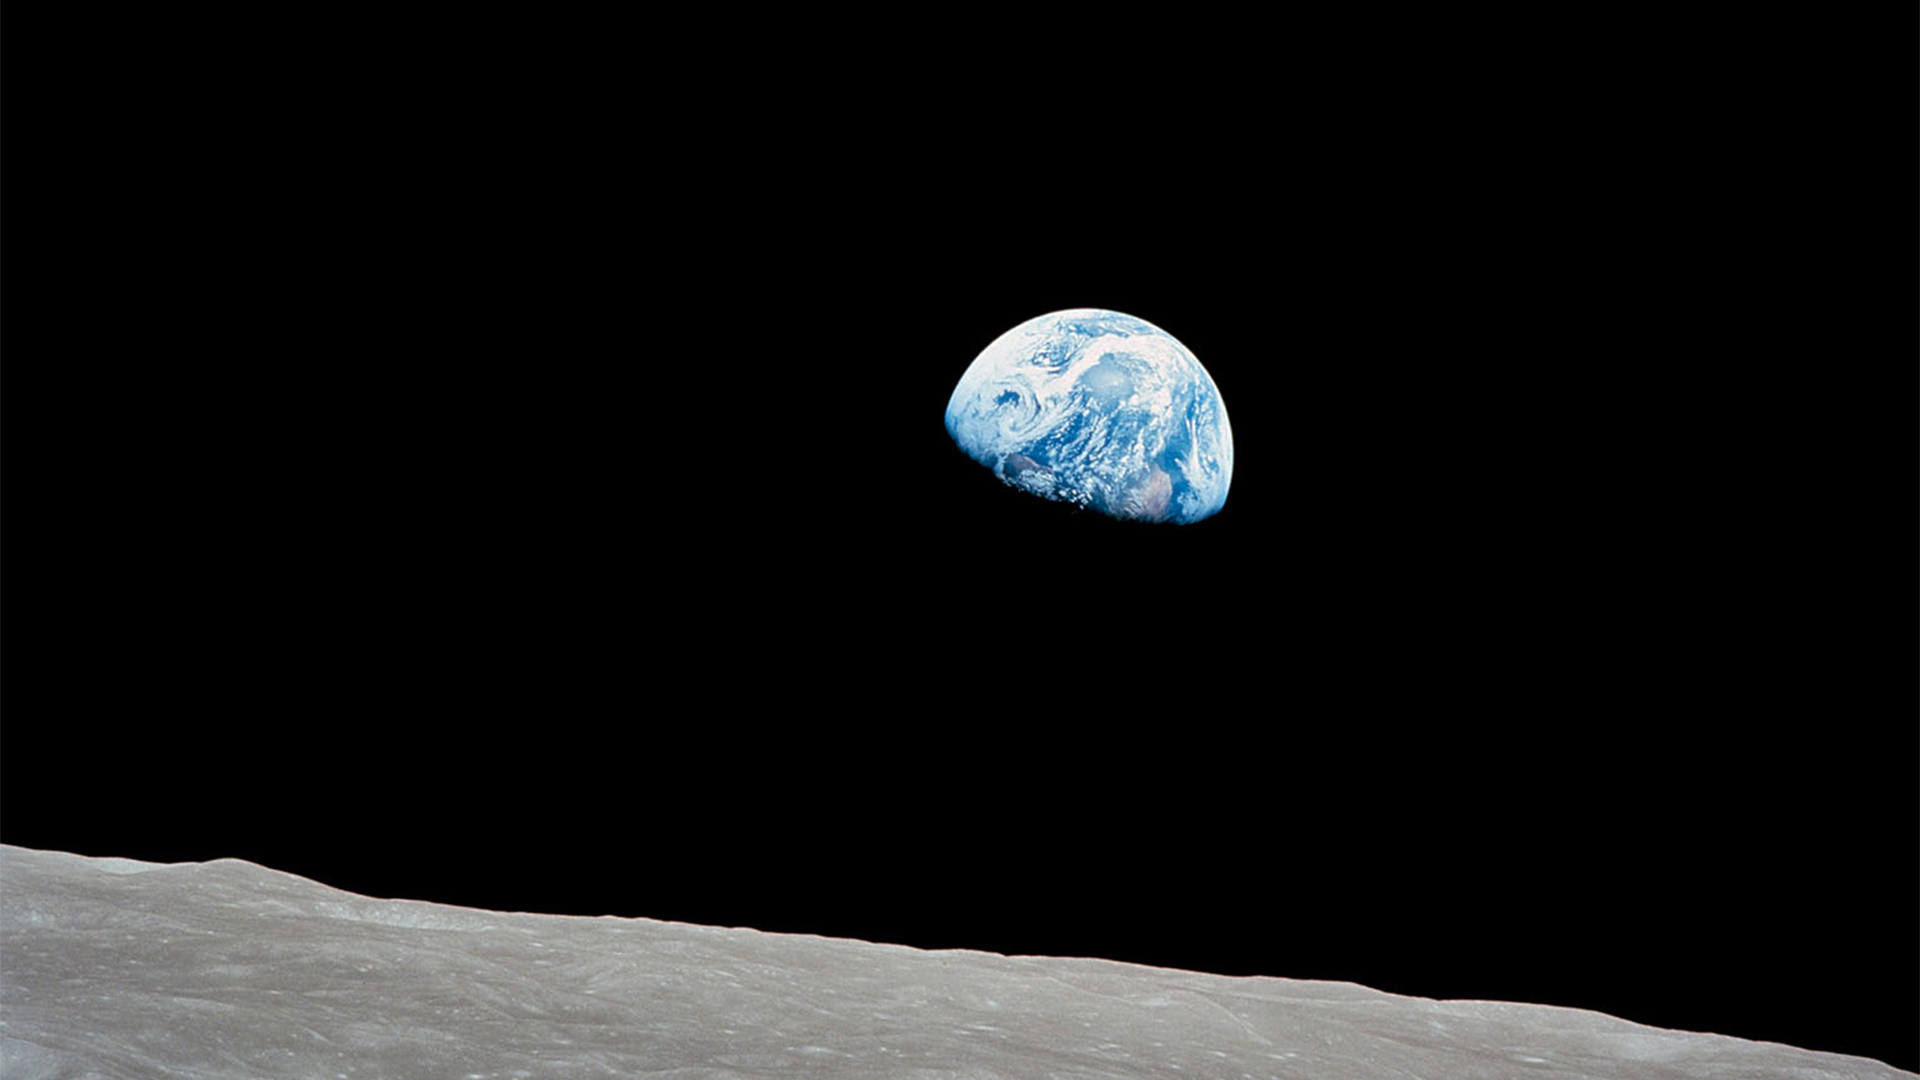 View of earth from the moon's surface